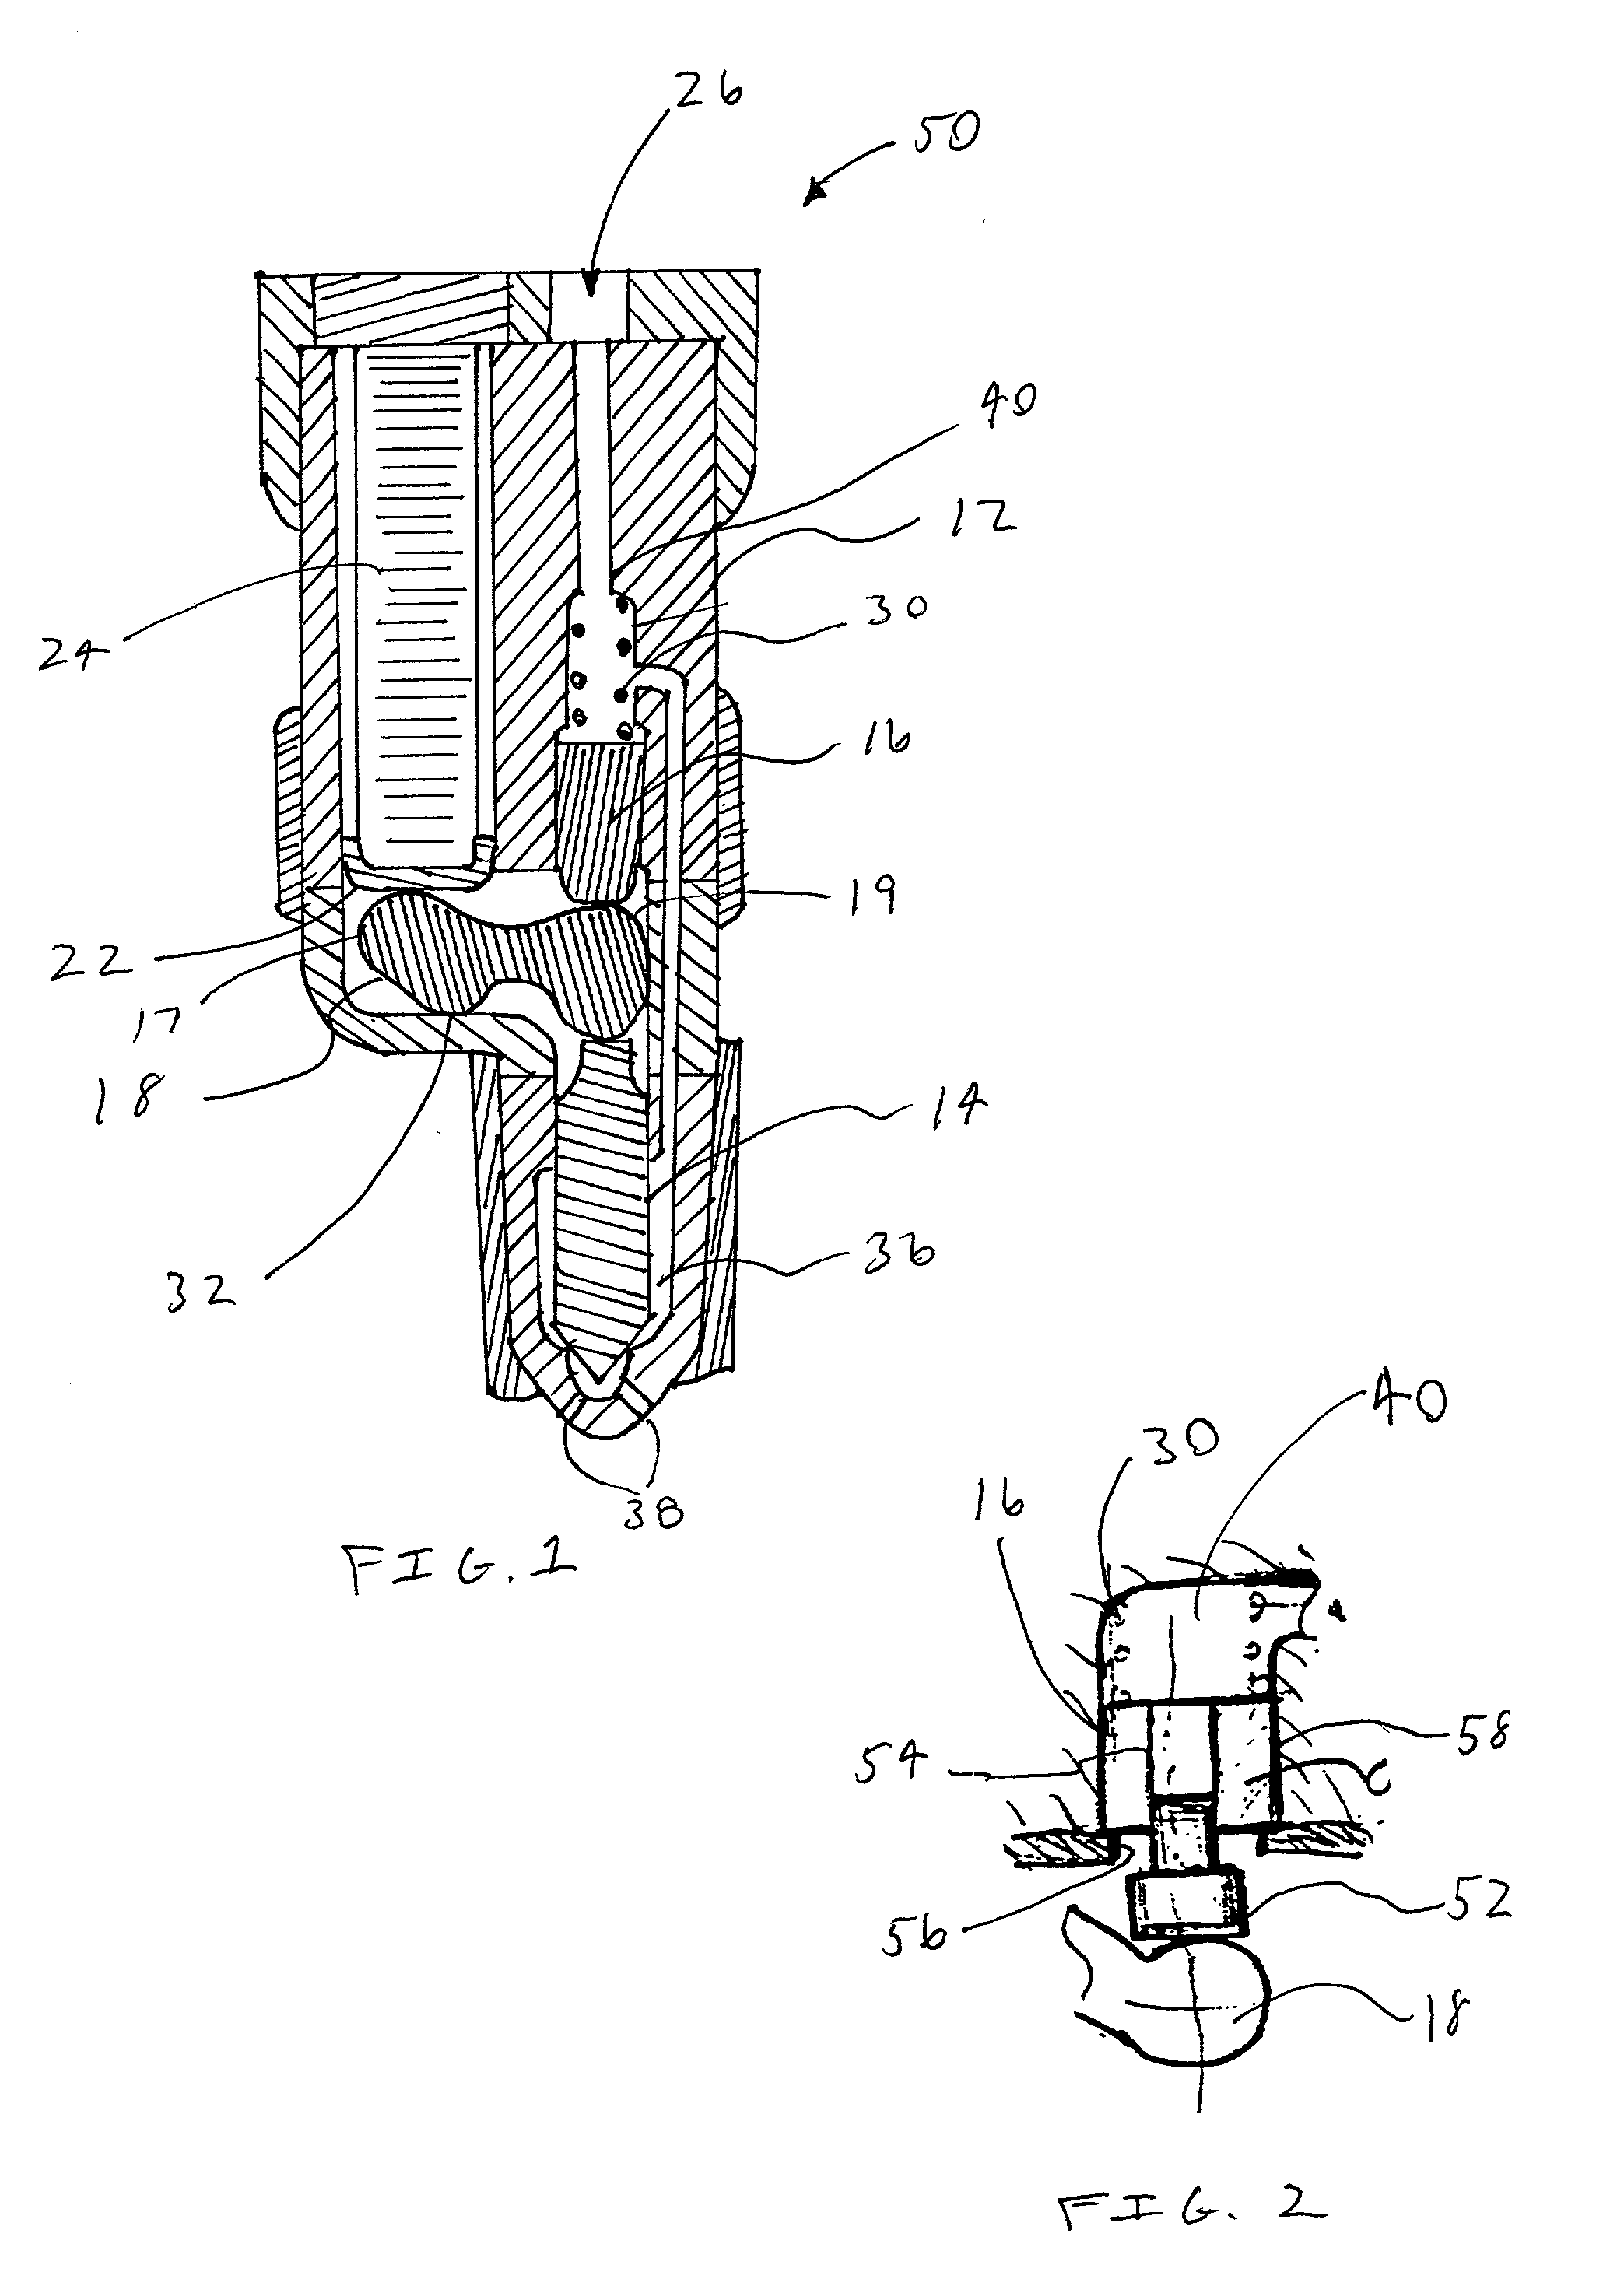 Proportional needle control injector